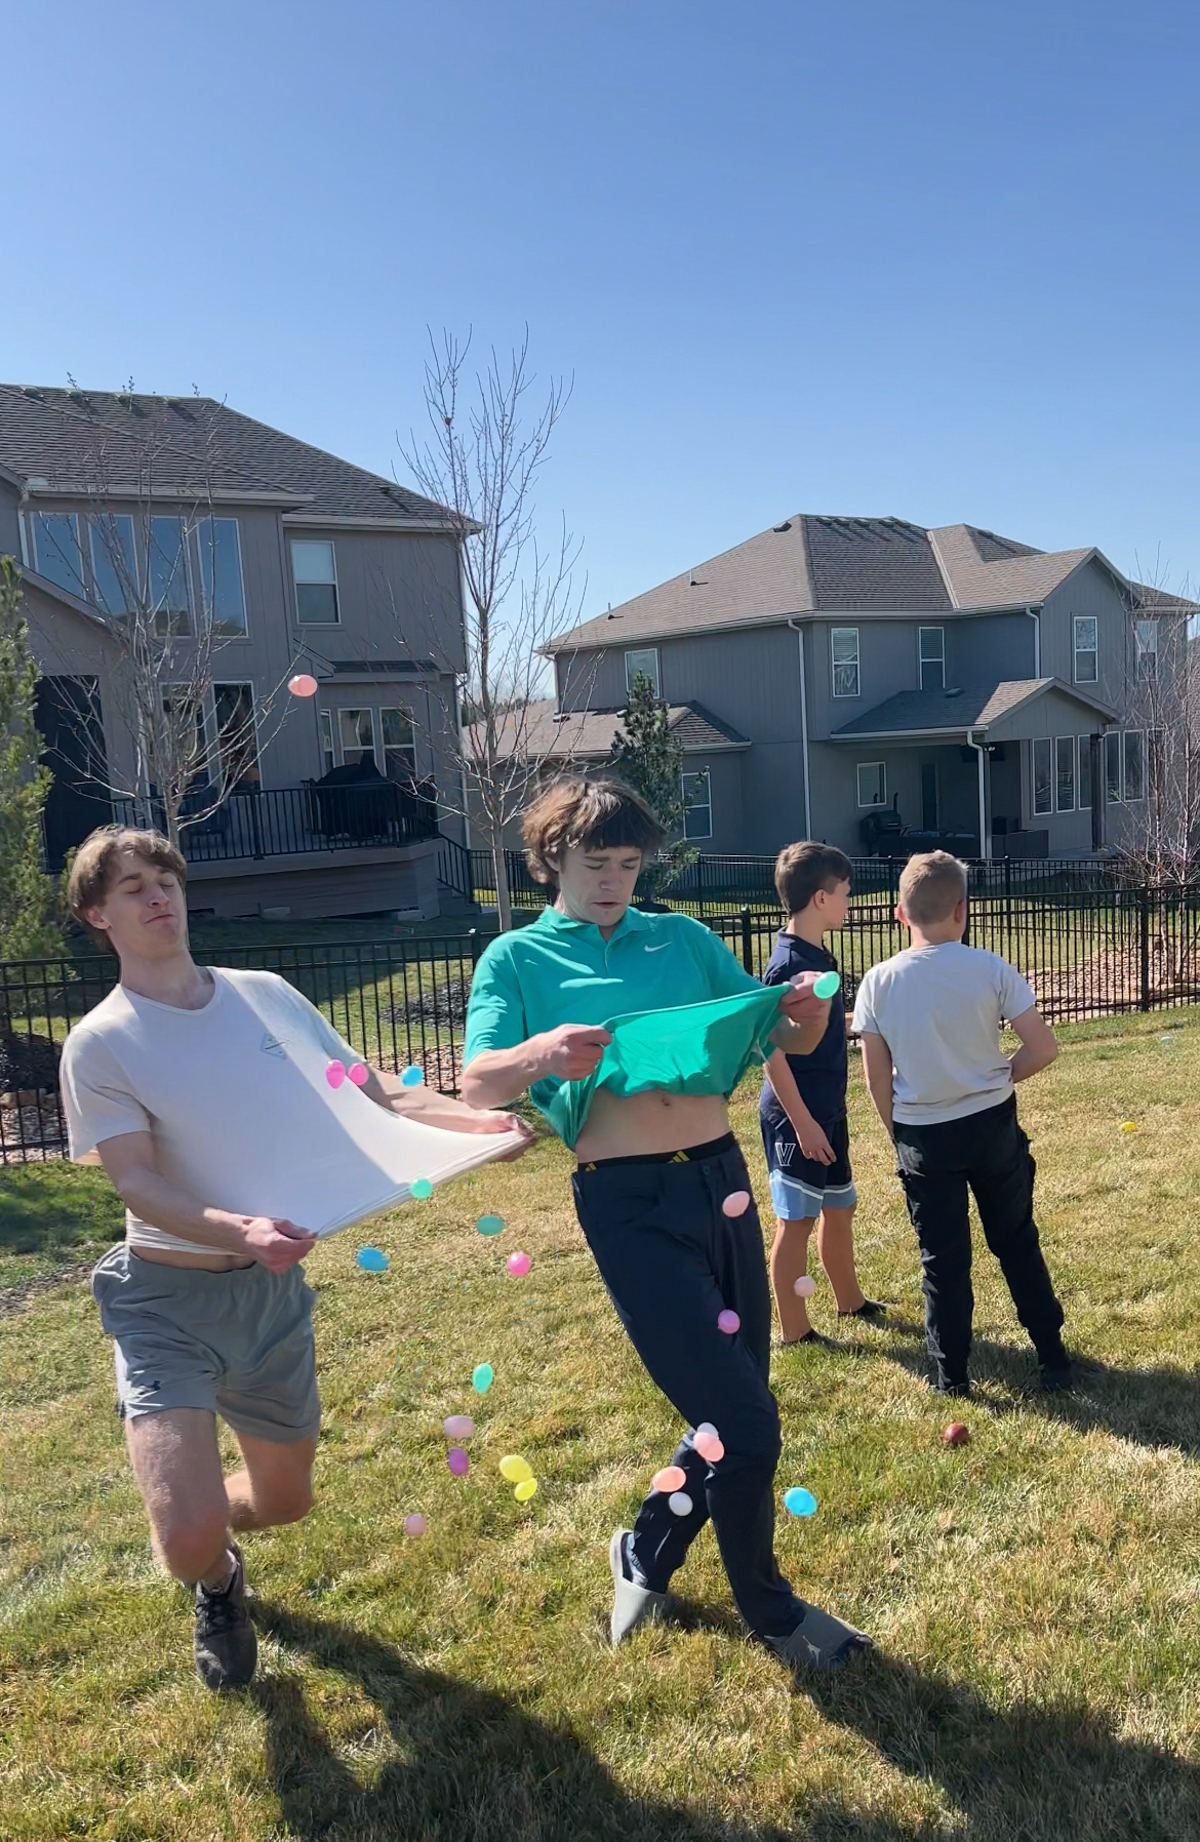 teens trying to catch eggs in their shirts